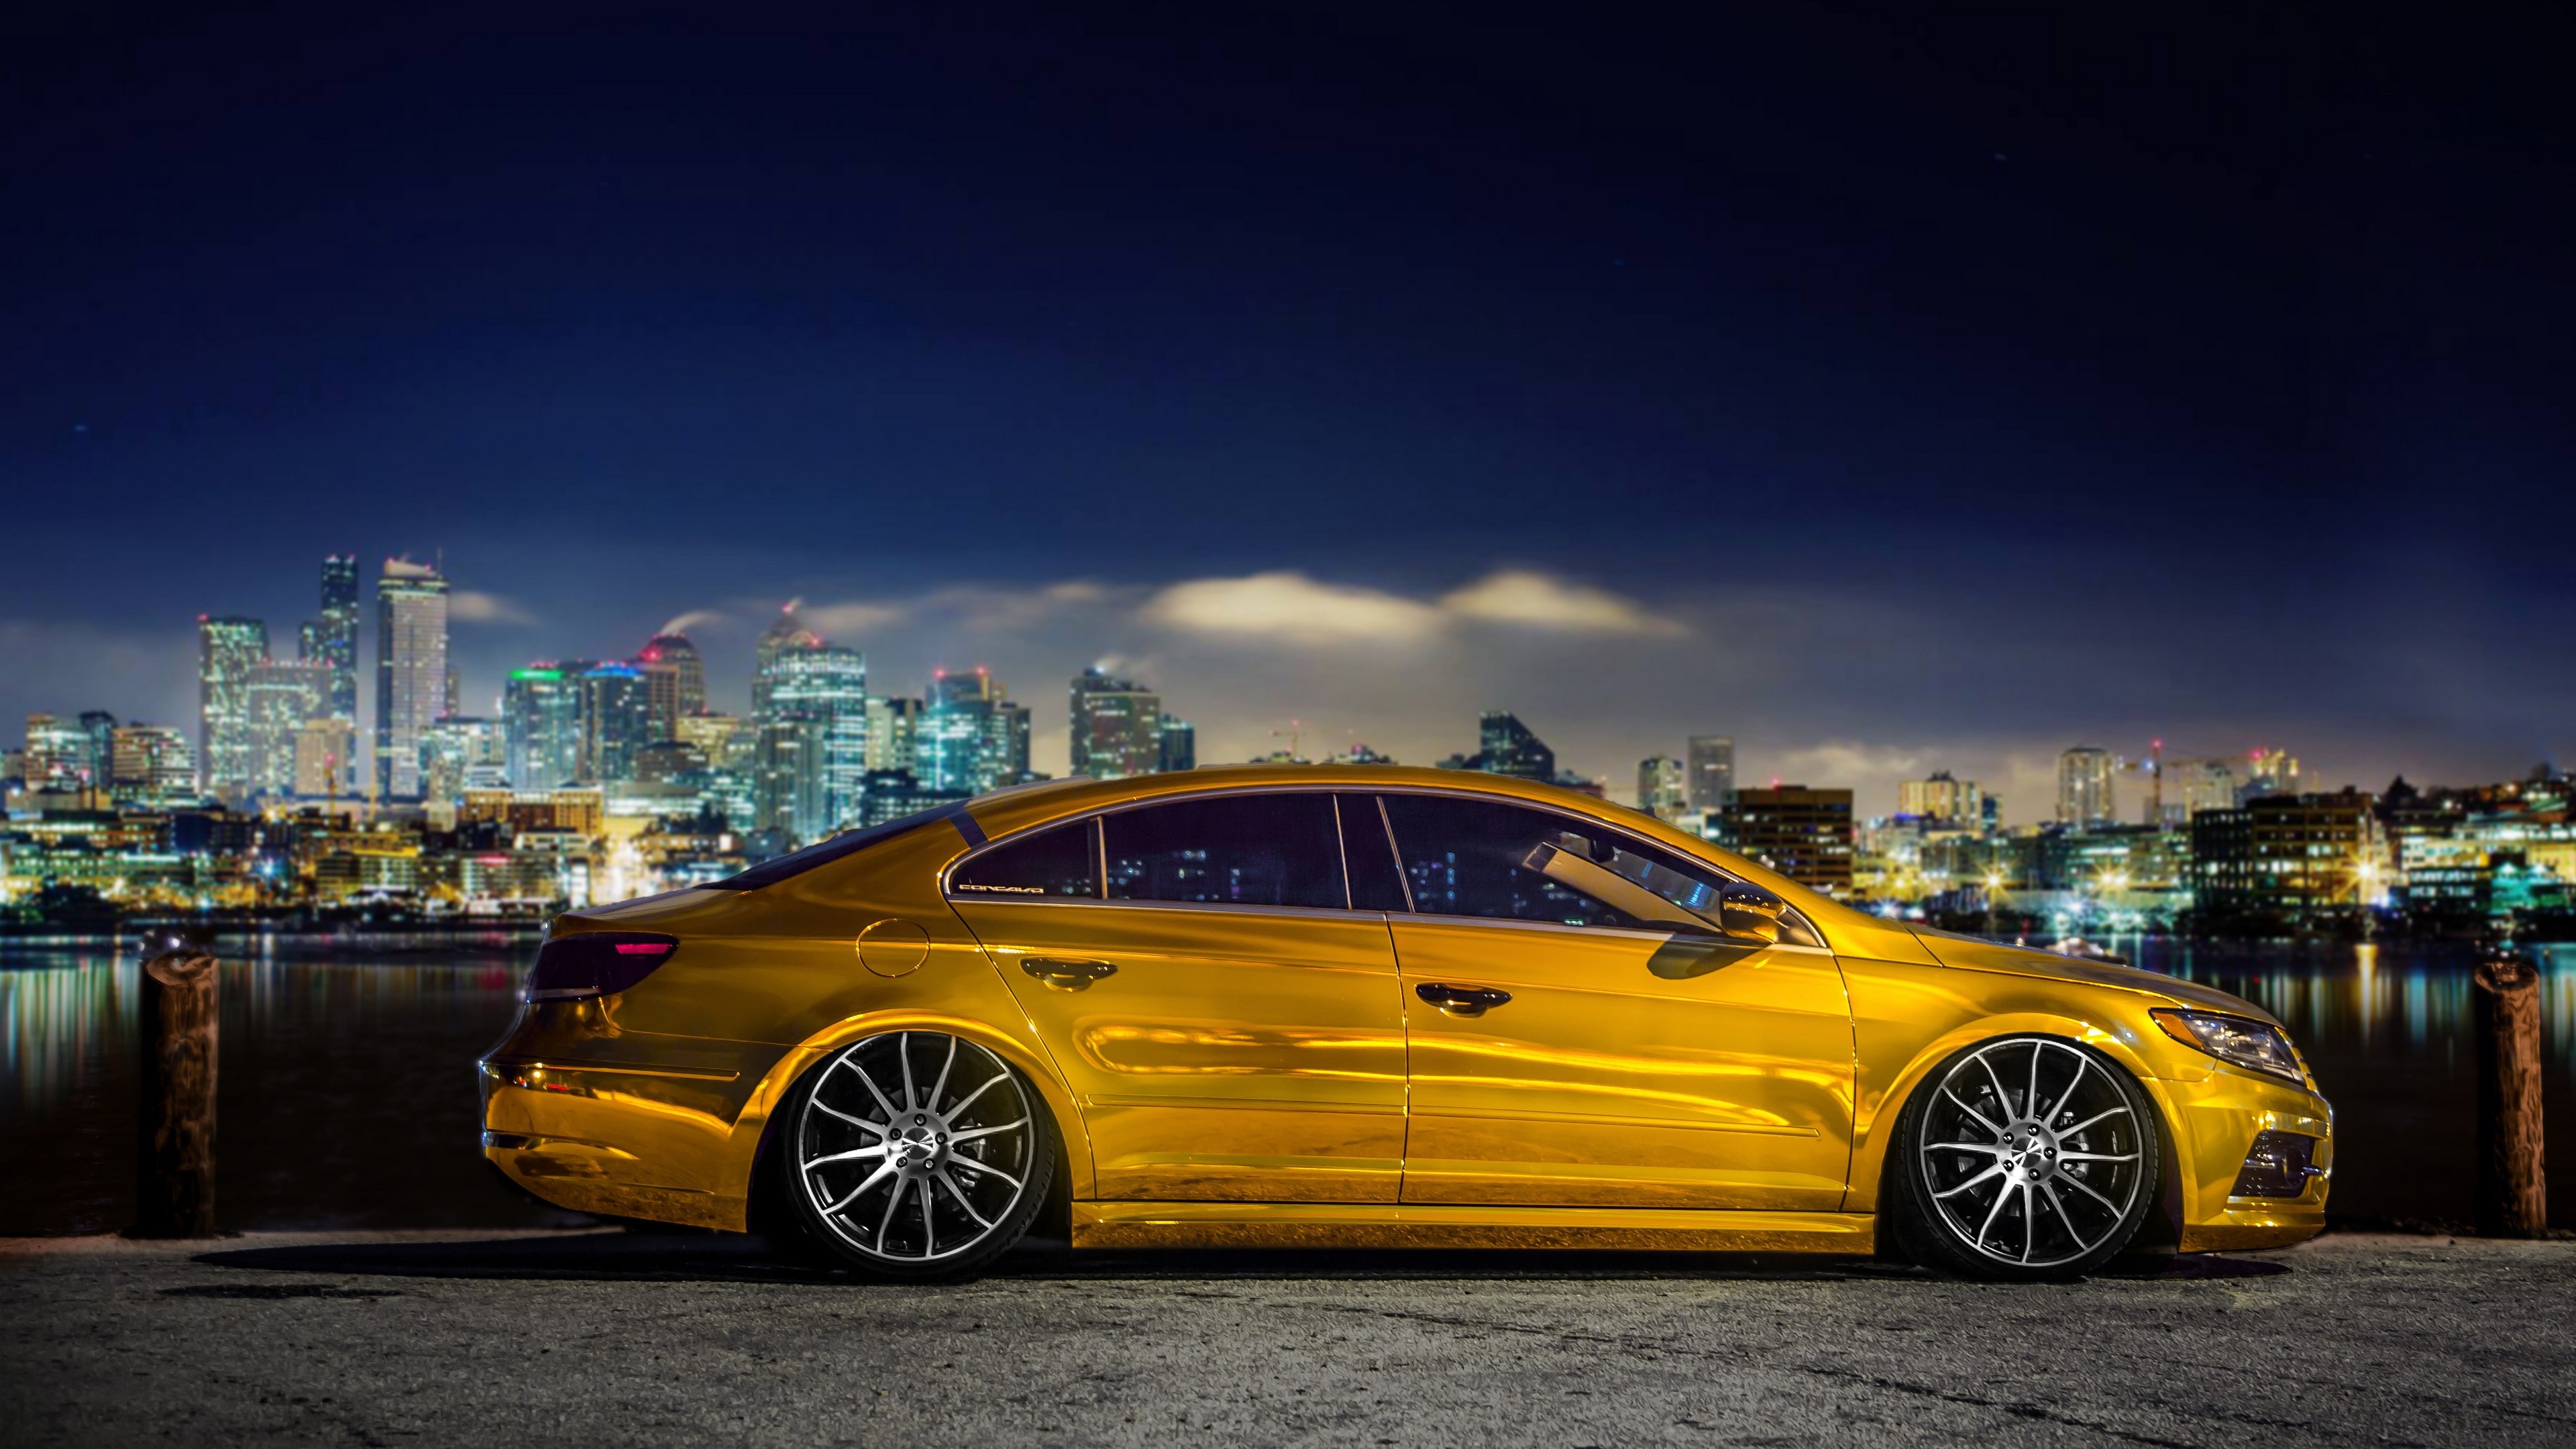 General 3840x2160 car yellow cars vehicle cityscape Volkswagen CC Volkswagen Arteon German cars Volkswagen Group stanced